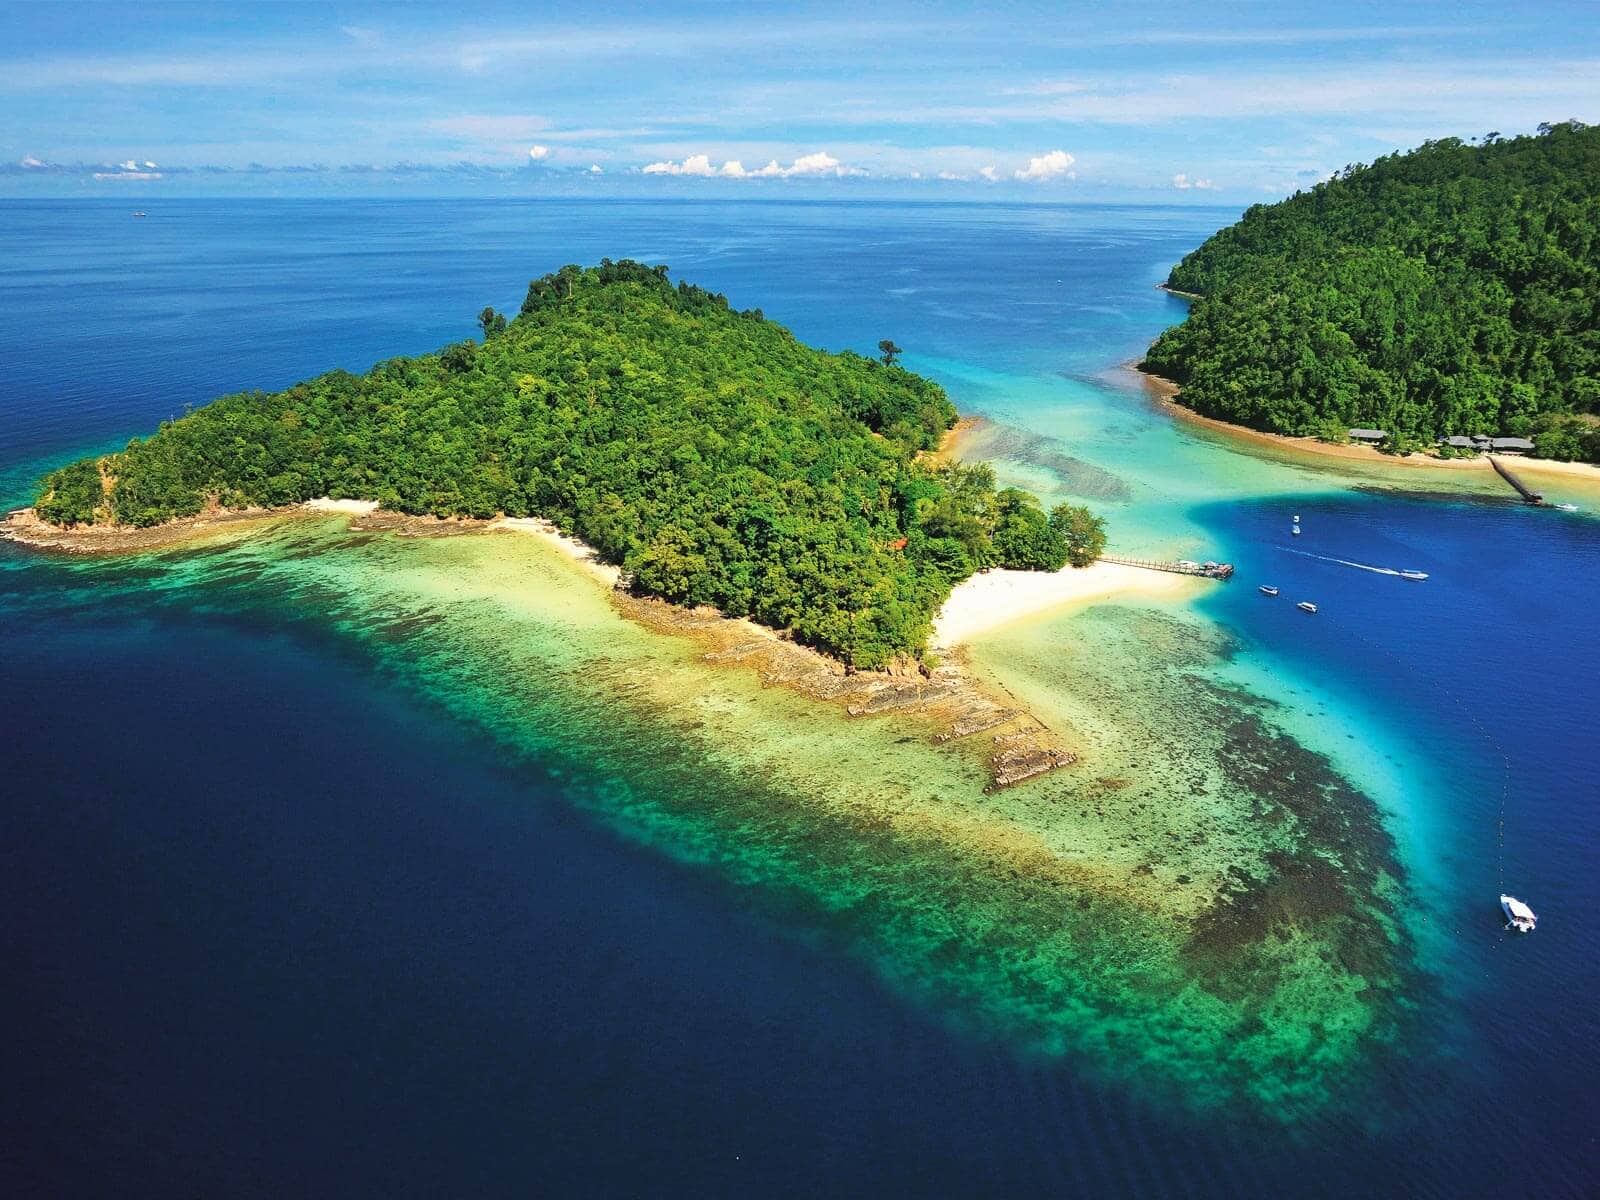 Sabah Diving and Island